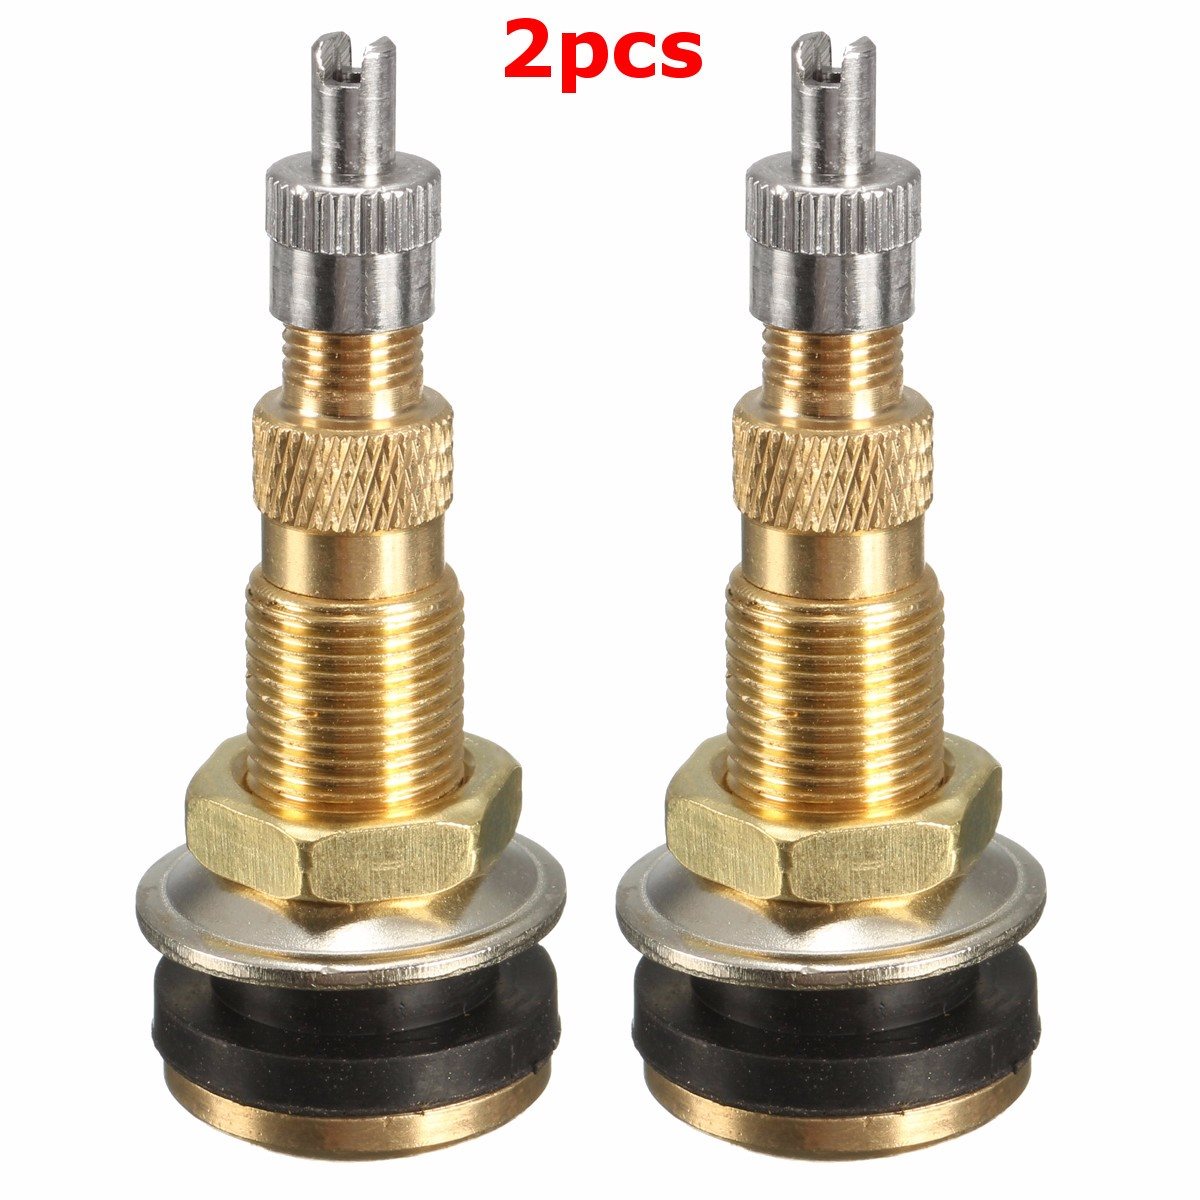 2PCs Air Water Tubeless Tire Valve Stems Wheel Rim TR618A For Agricultural/Farm Tractor